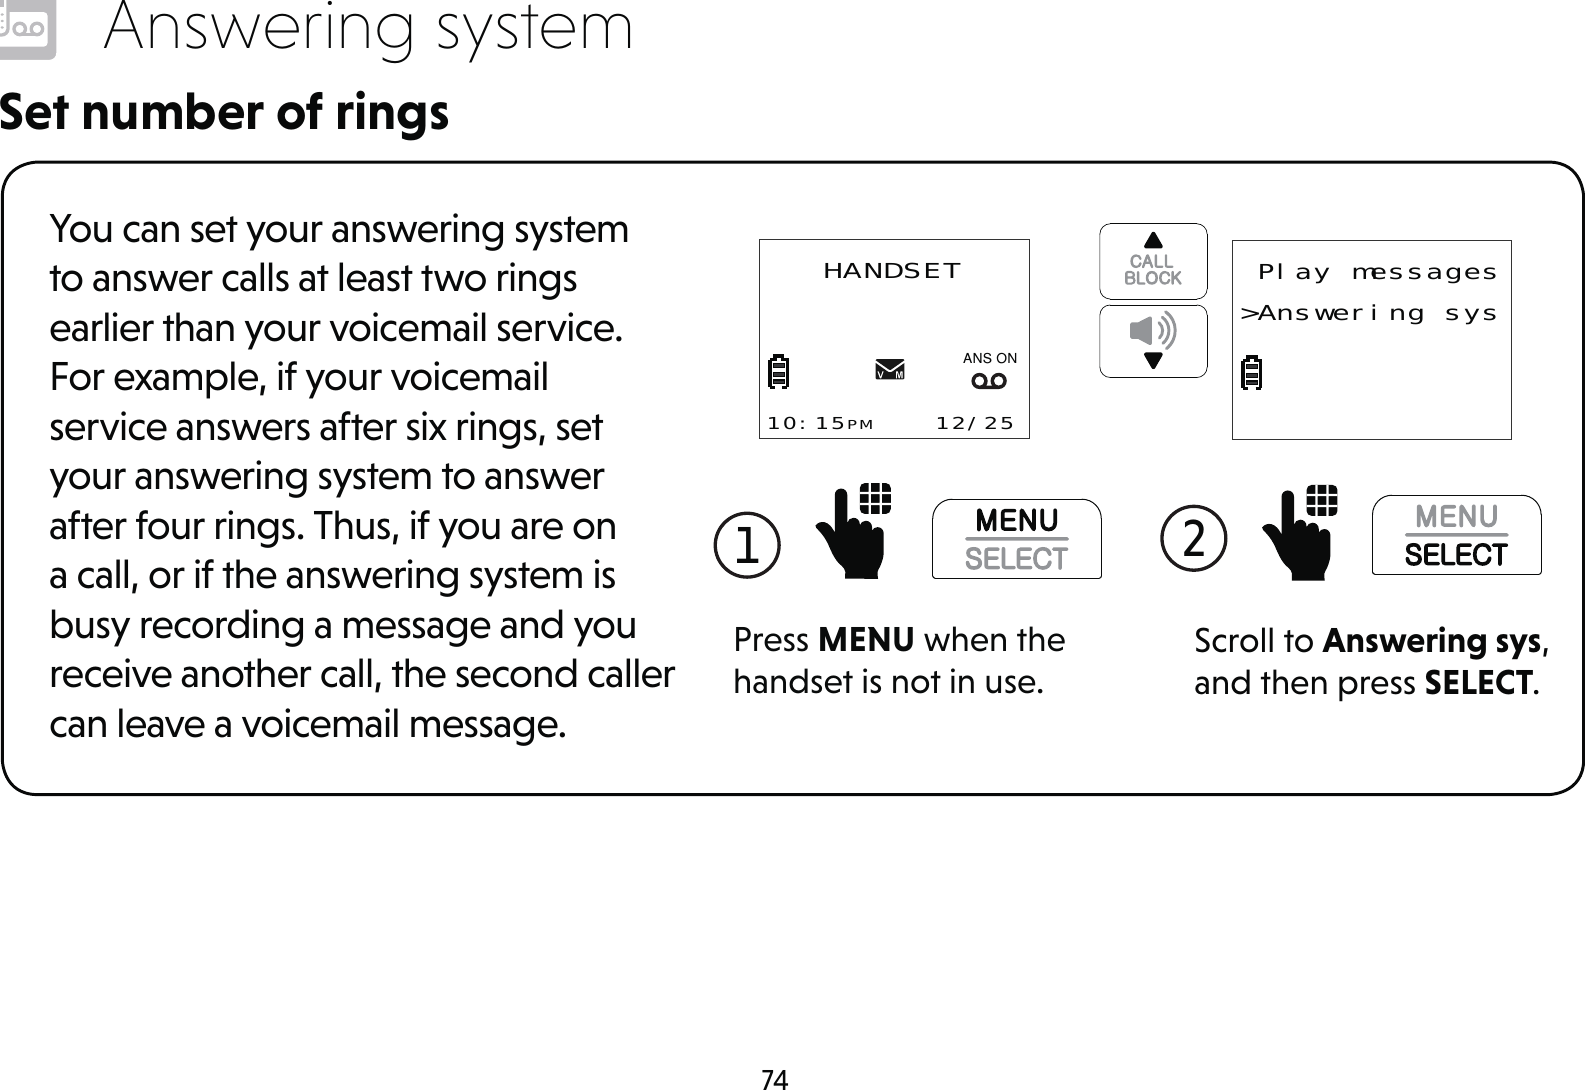 74Answering systemSet number of ringsYou can set your answering system to answer calls at least two rings earlier than your voicemail service. For example, if your voicemail service answers after six rings, set your answering system to answer after four rings. Thus, if you are on a call, or if the answering system is busy recording a message and you receive another call, the second caller can leave a voicemail message.1 Press MENU when the handset is not in use.HANDSET10:15PM    12/25$1621Scroll to Answering sys, and then press SELECT.2  Play messages&gt;Answering sys